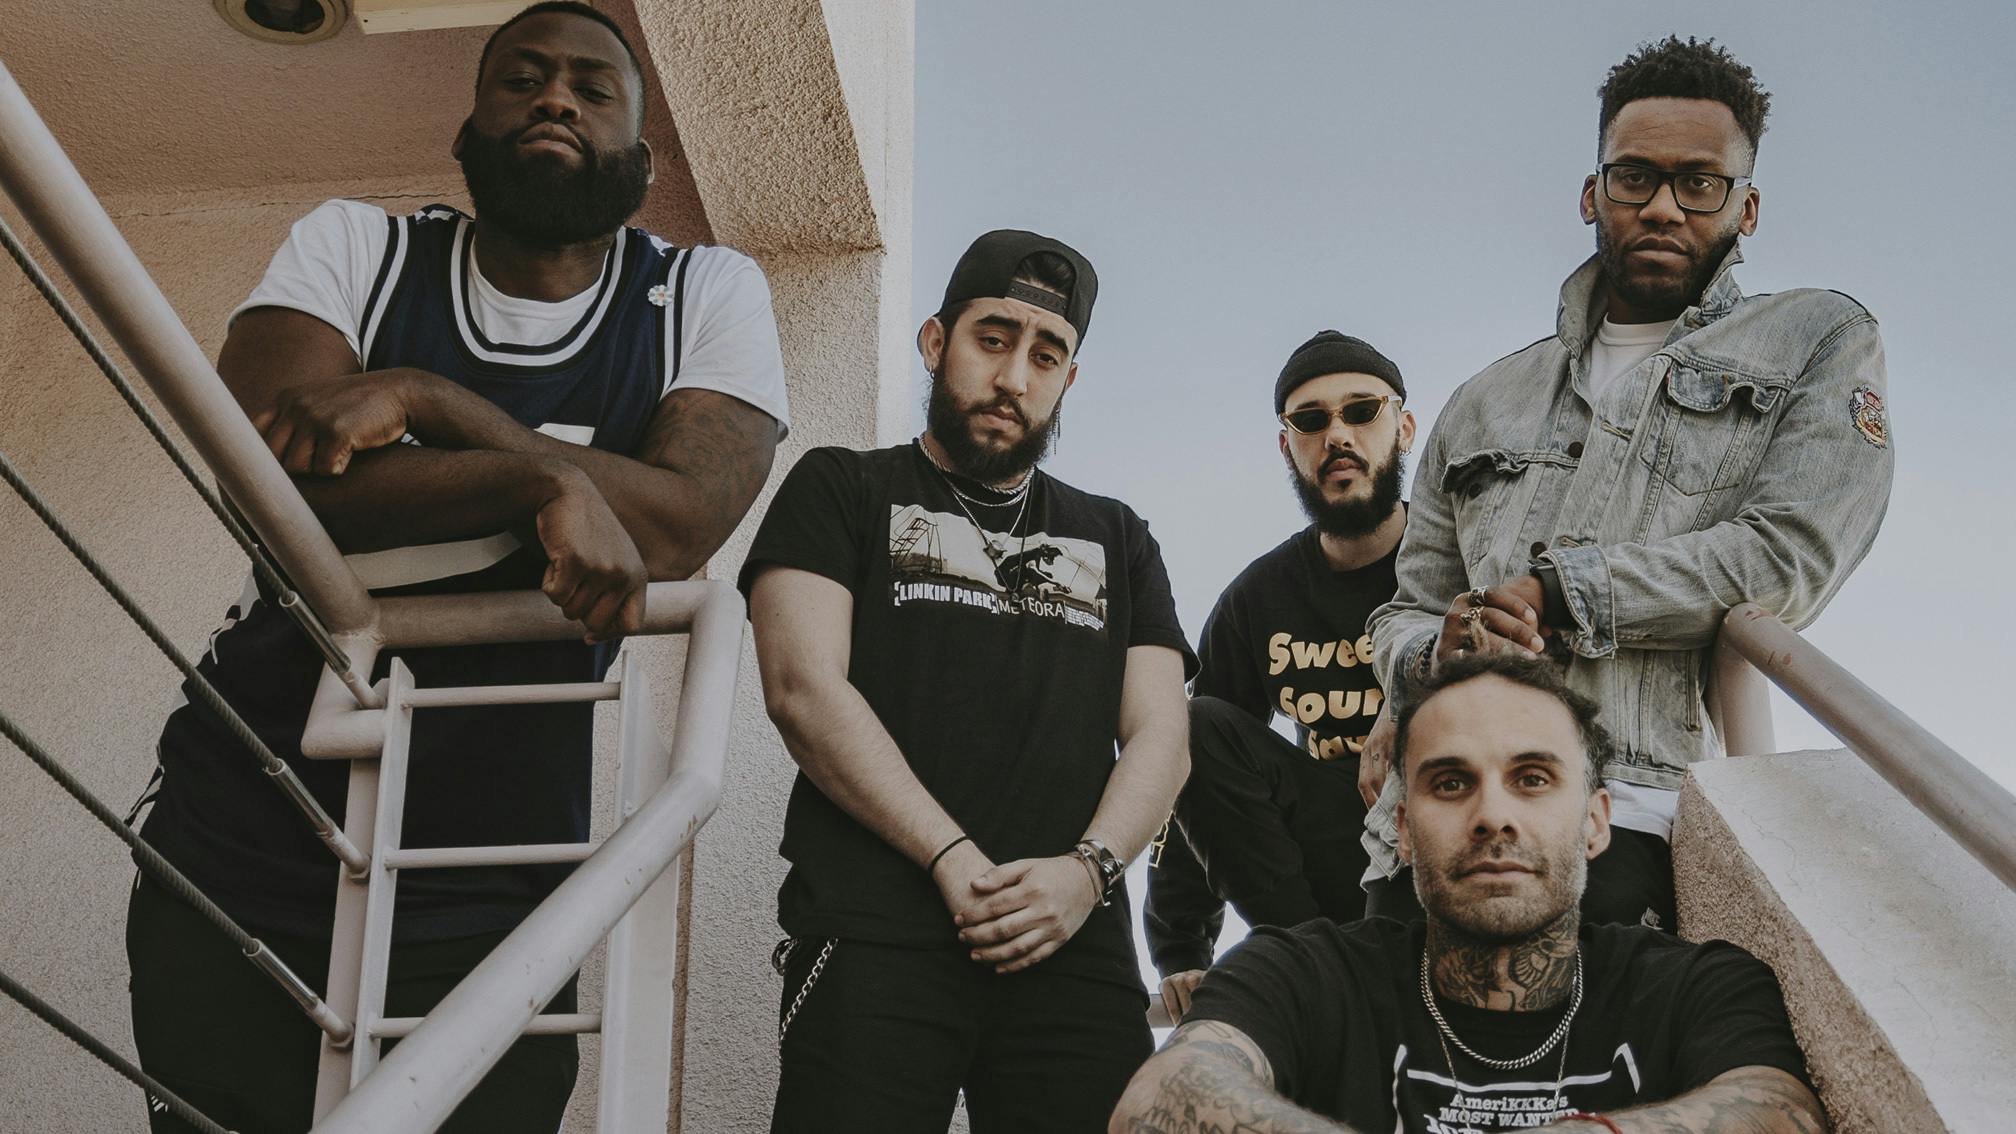 Jason Aalon Butler's 333 Wreckords Crew Announce New Signing, Oxymorrons